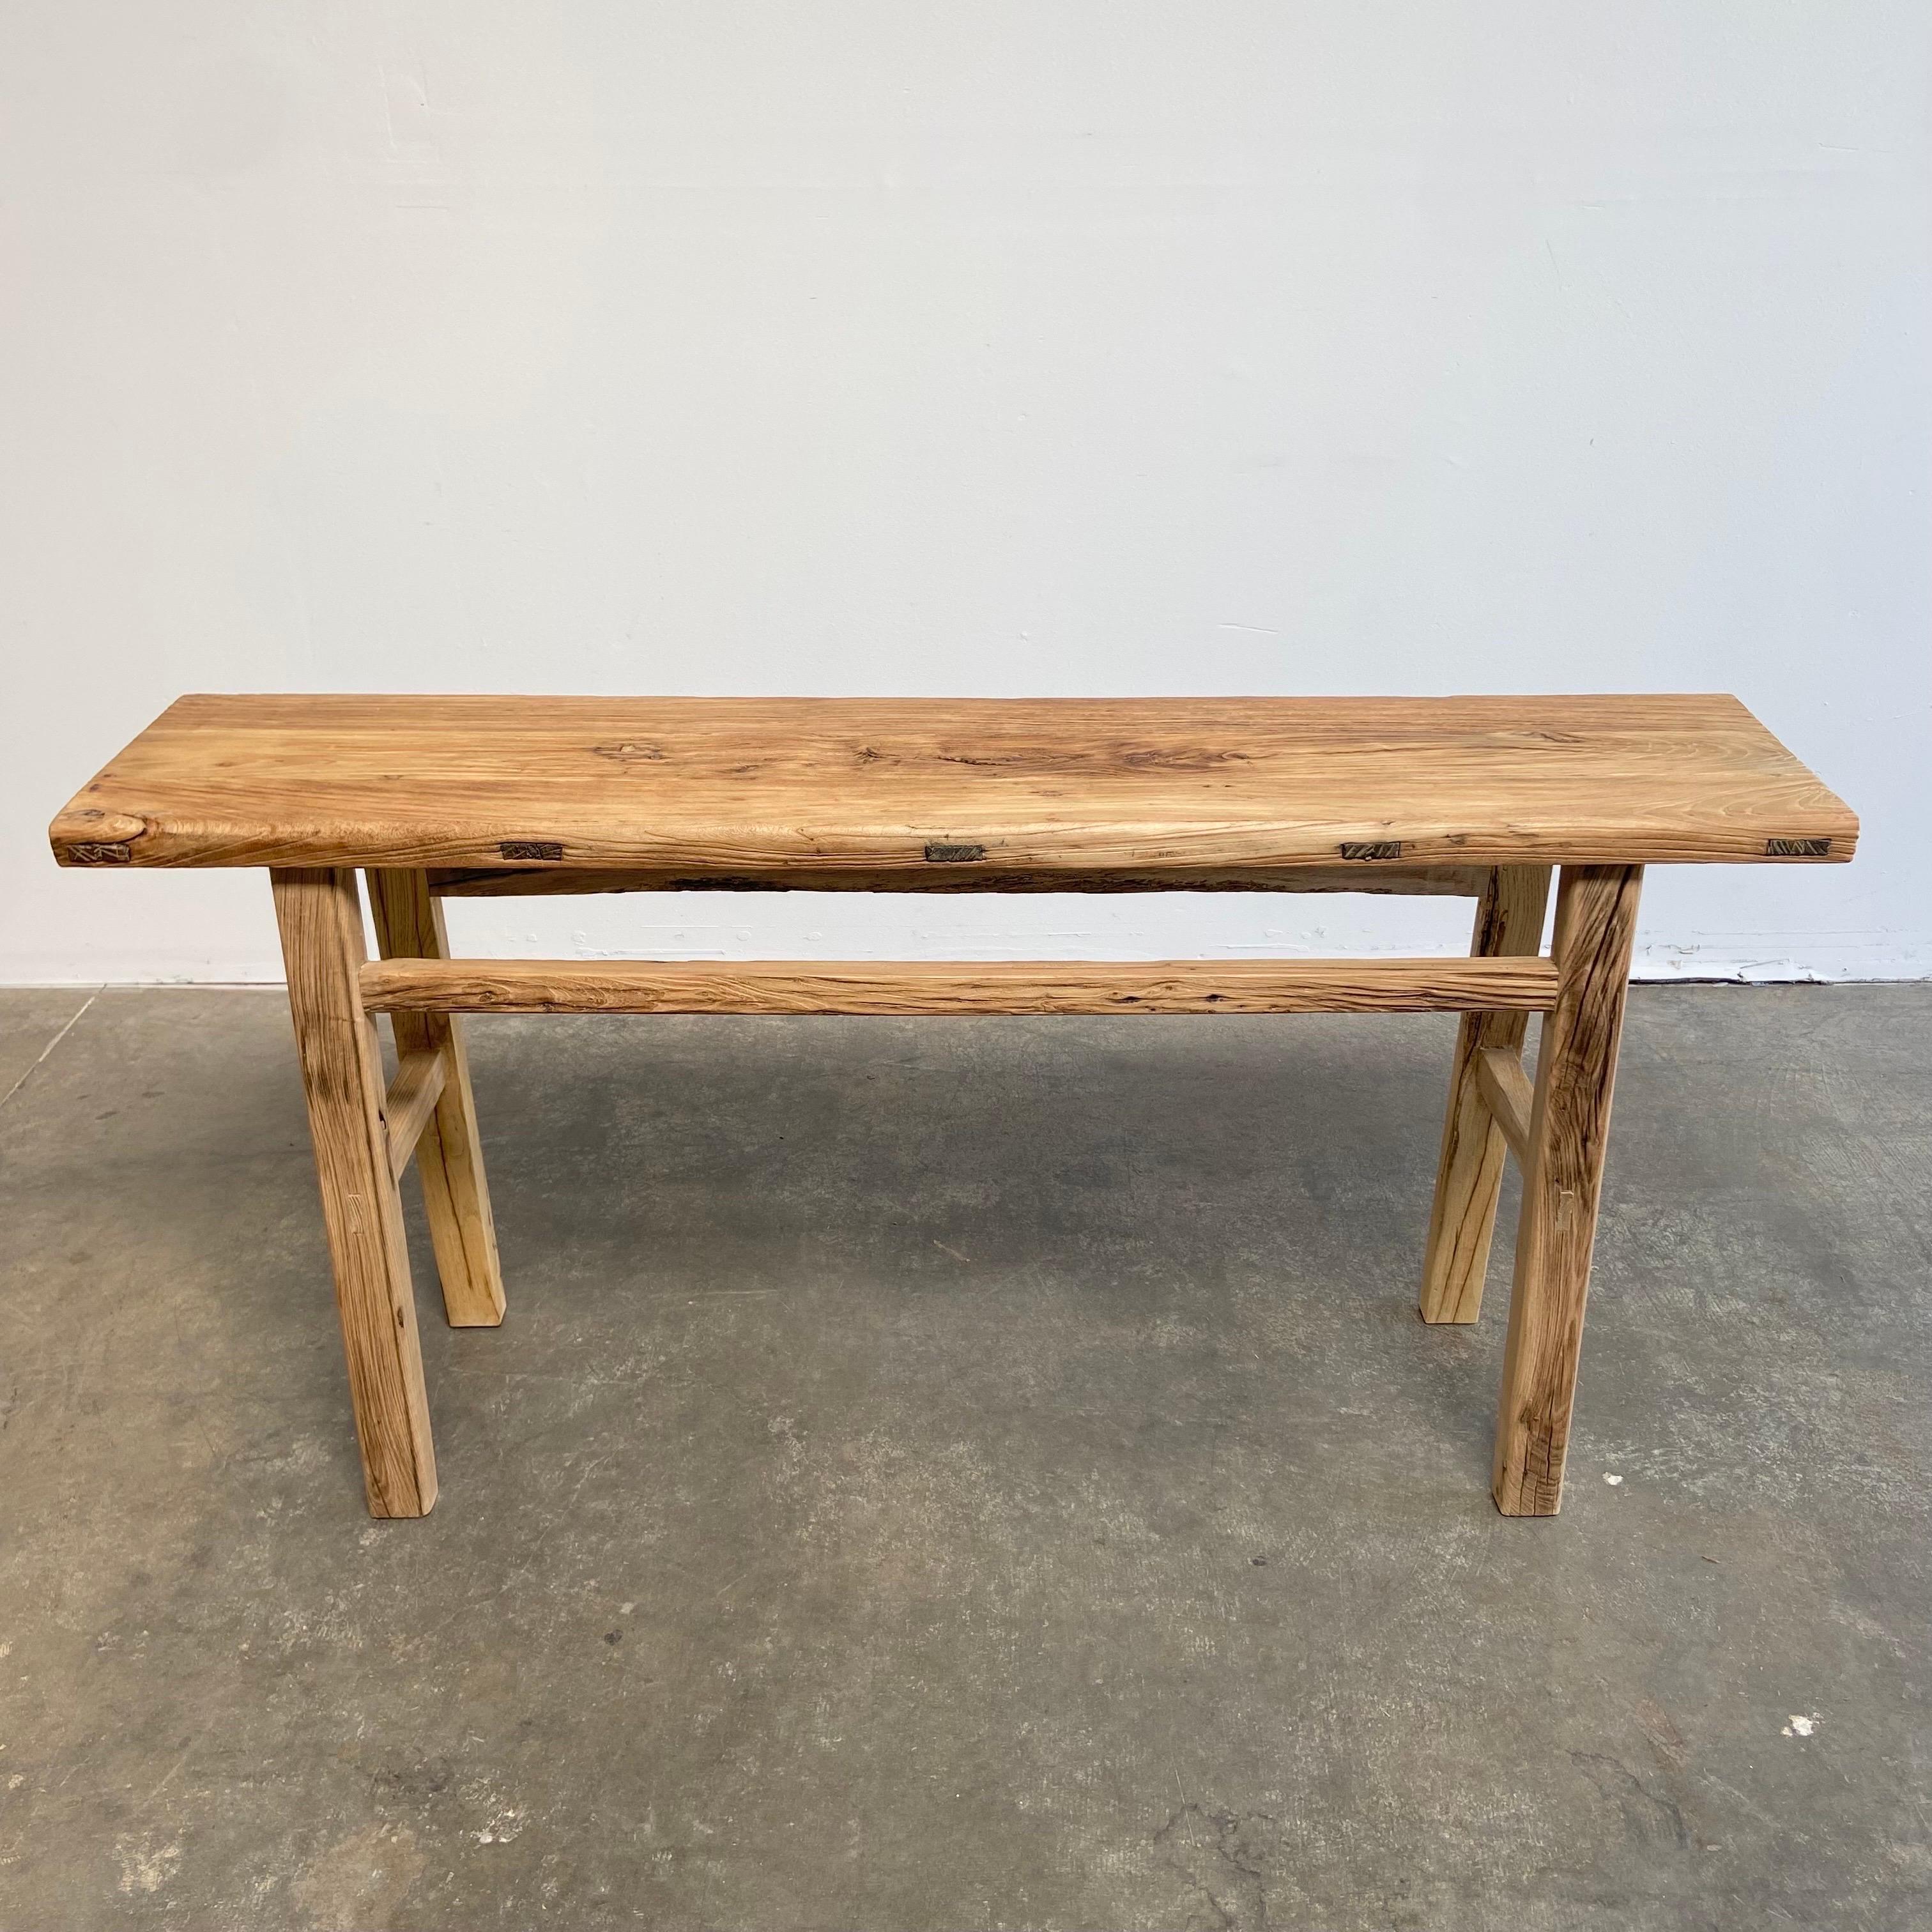 Reclaimed from Vintage timbers, this Elm Wood Console Table features original notches from the door hinges on the inside of the legs. Made from Vintage reclaimed elm wood. Beautiful antique patina, with weathering and age, these are solid and sturdy